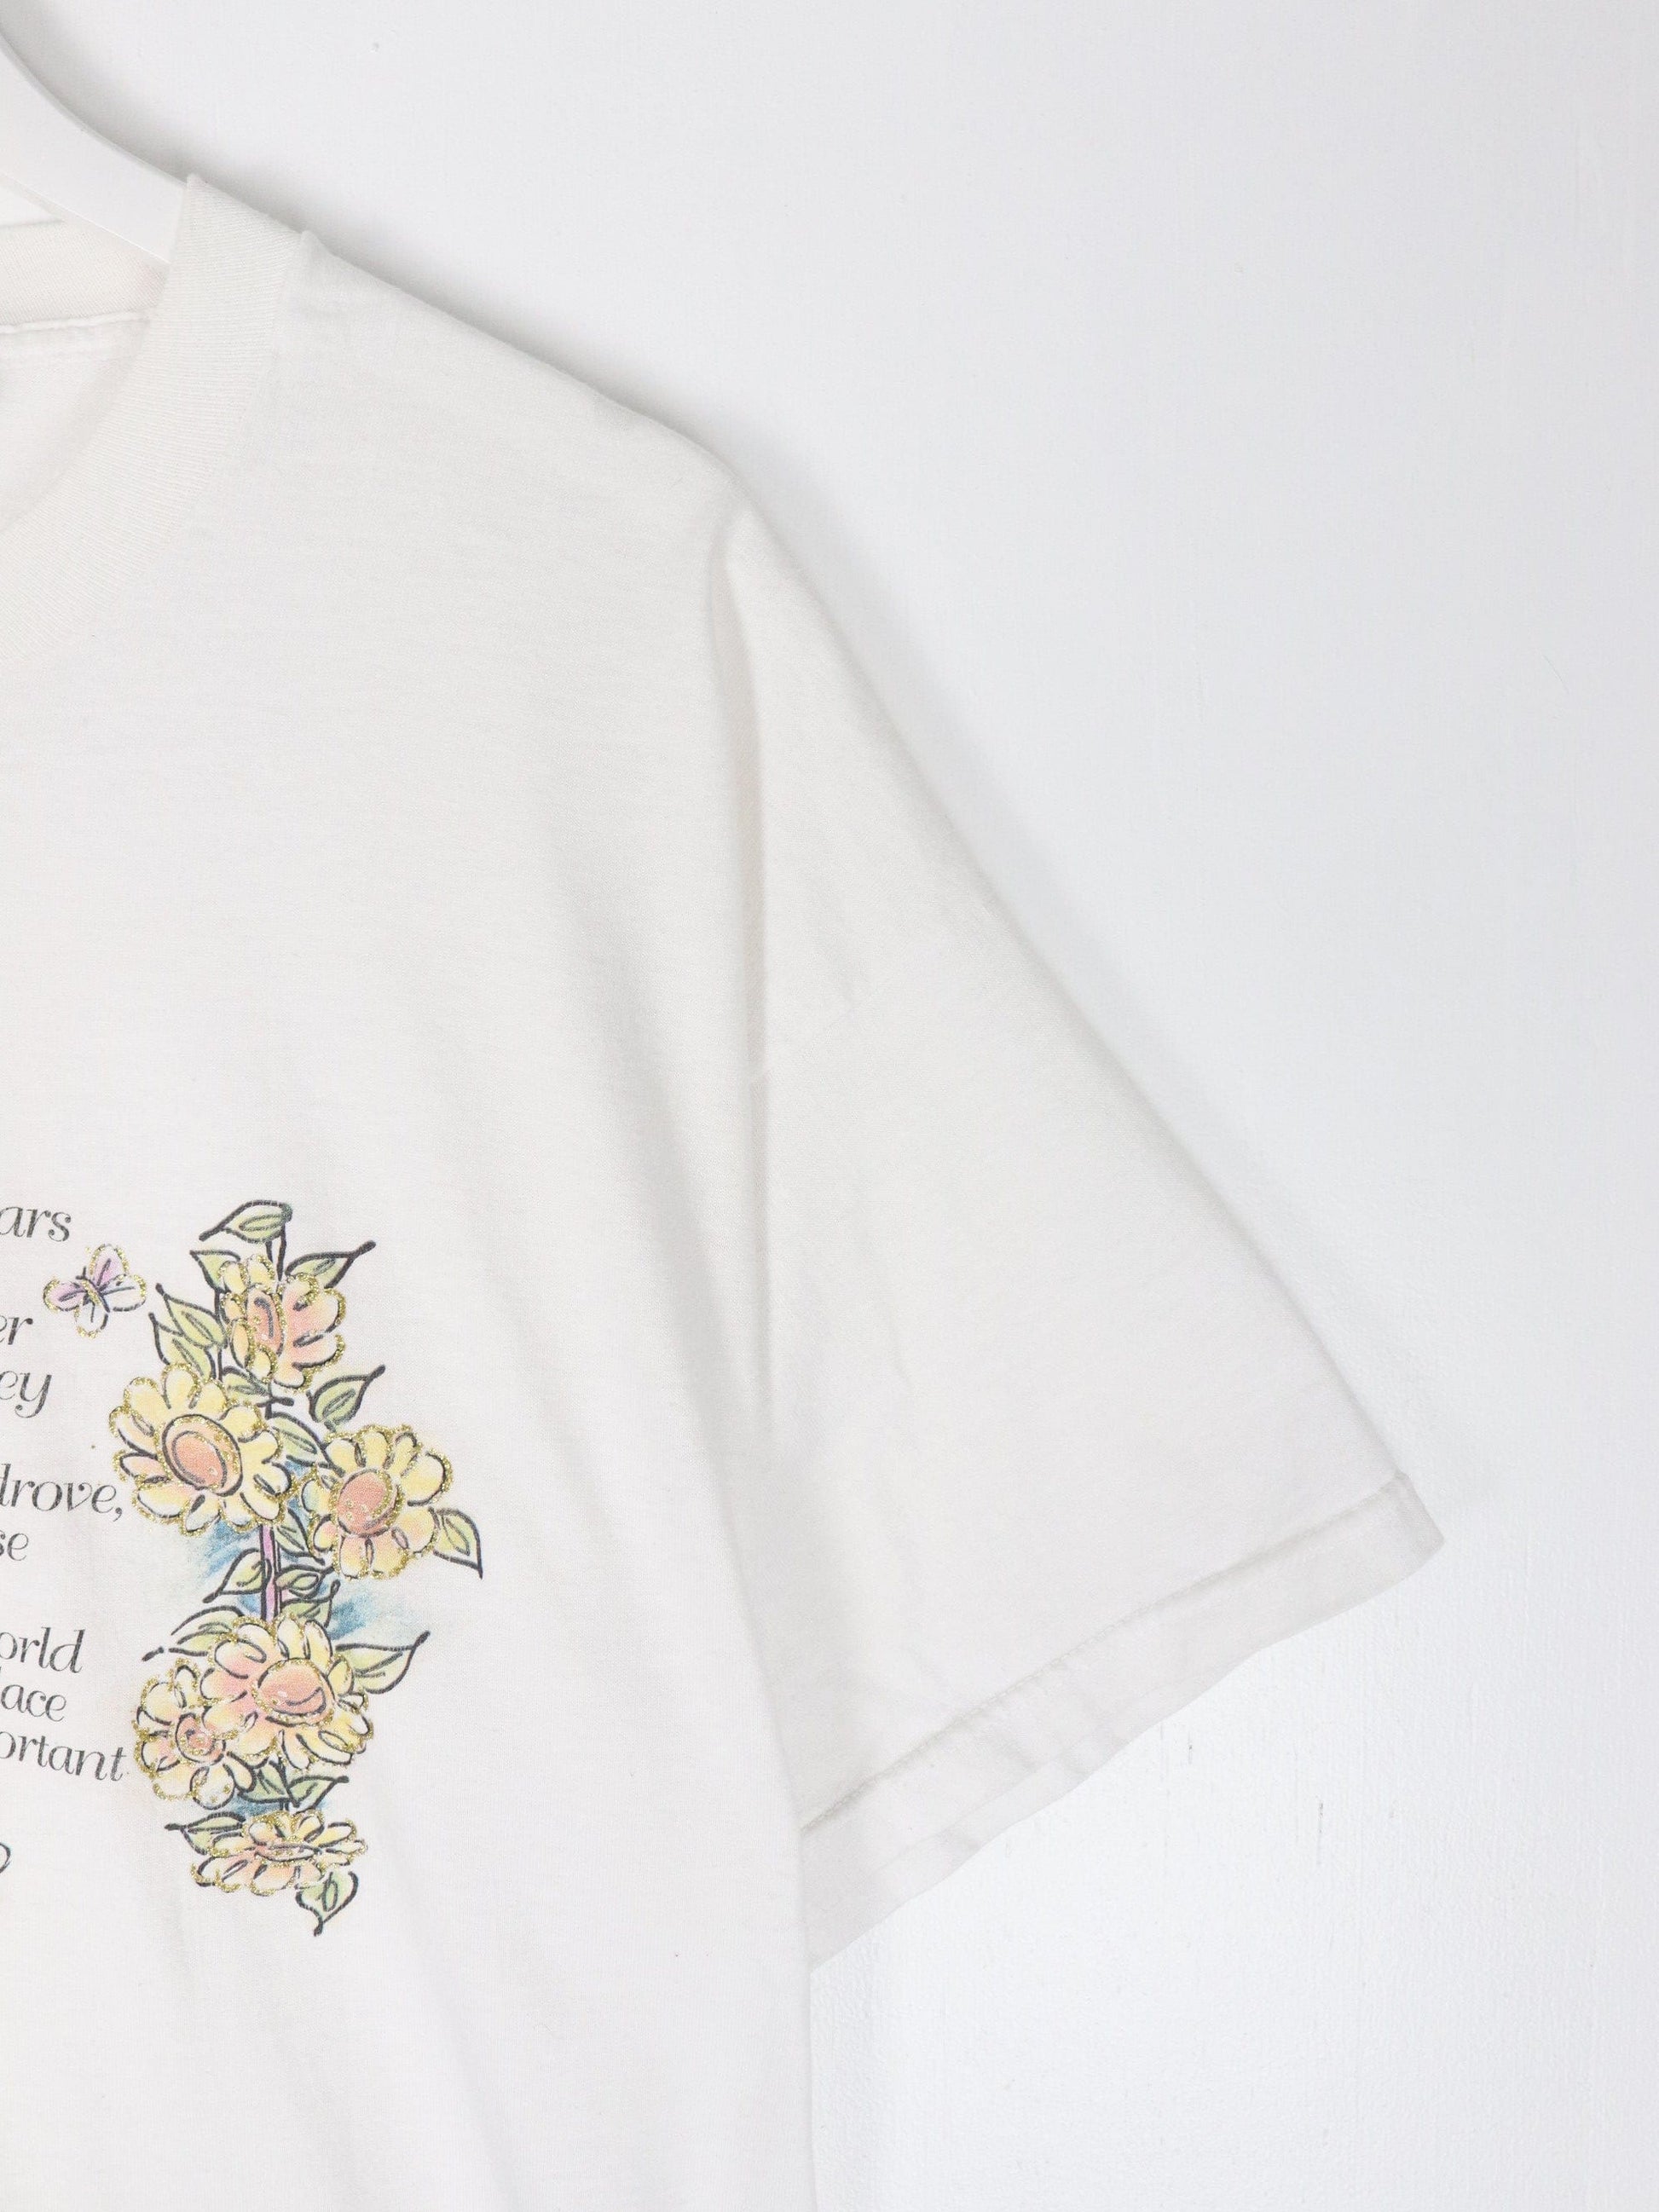 Other T-Shirts & Tank Tops Vintage Hundred Years From Now T Shirt Mens XL White Wholesome Quote 90s Floral